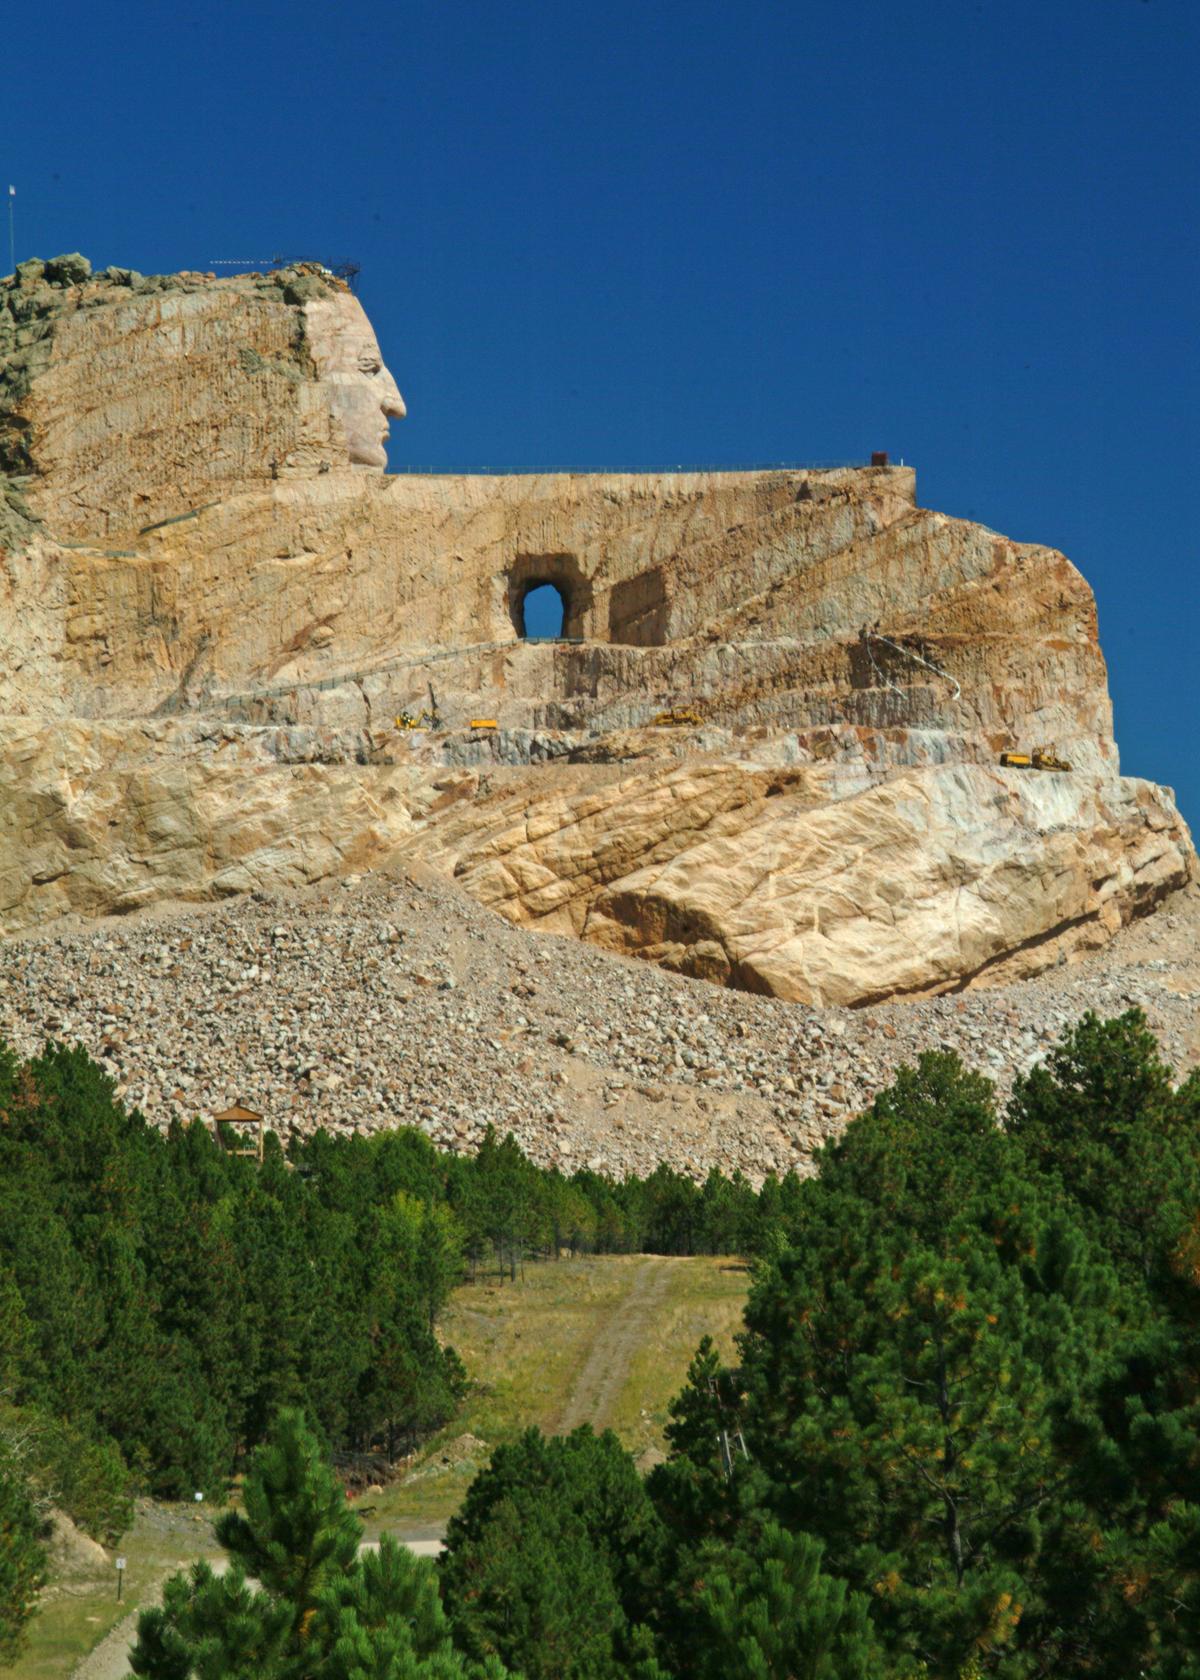 The idea for the Crazy Horse Memorial came about in late 1939, as nearby Mount Rushmore was well along. (Fred J. Eckert)